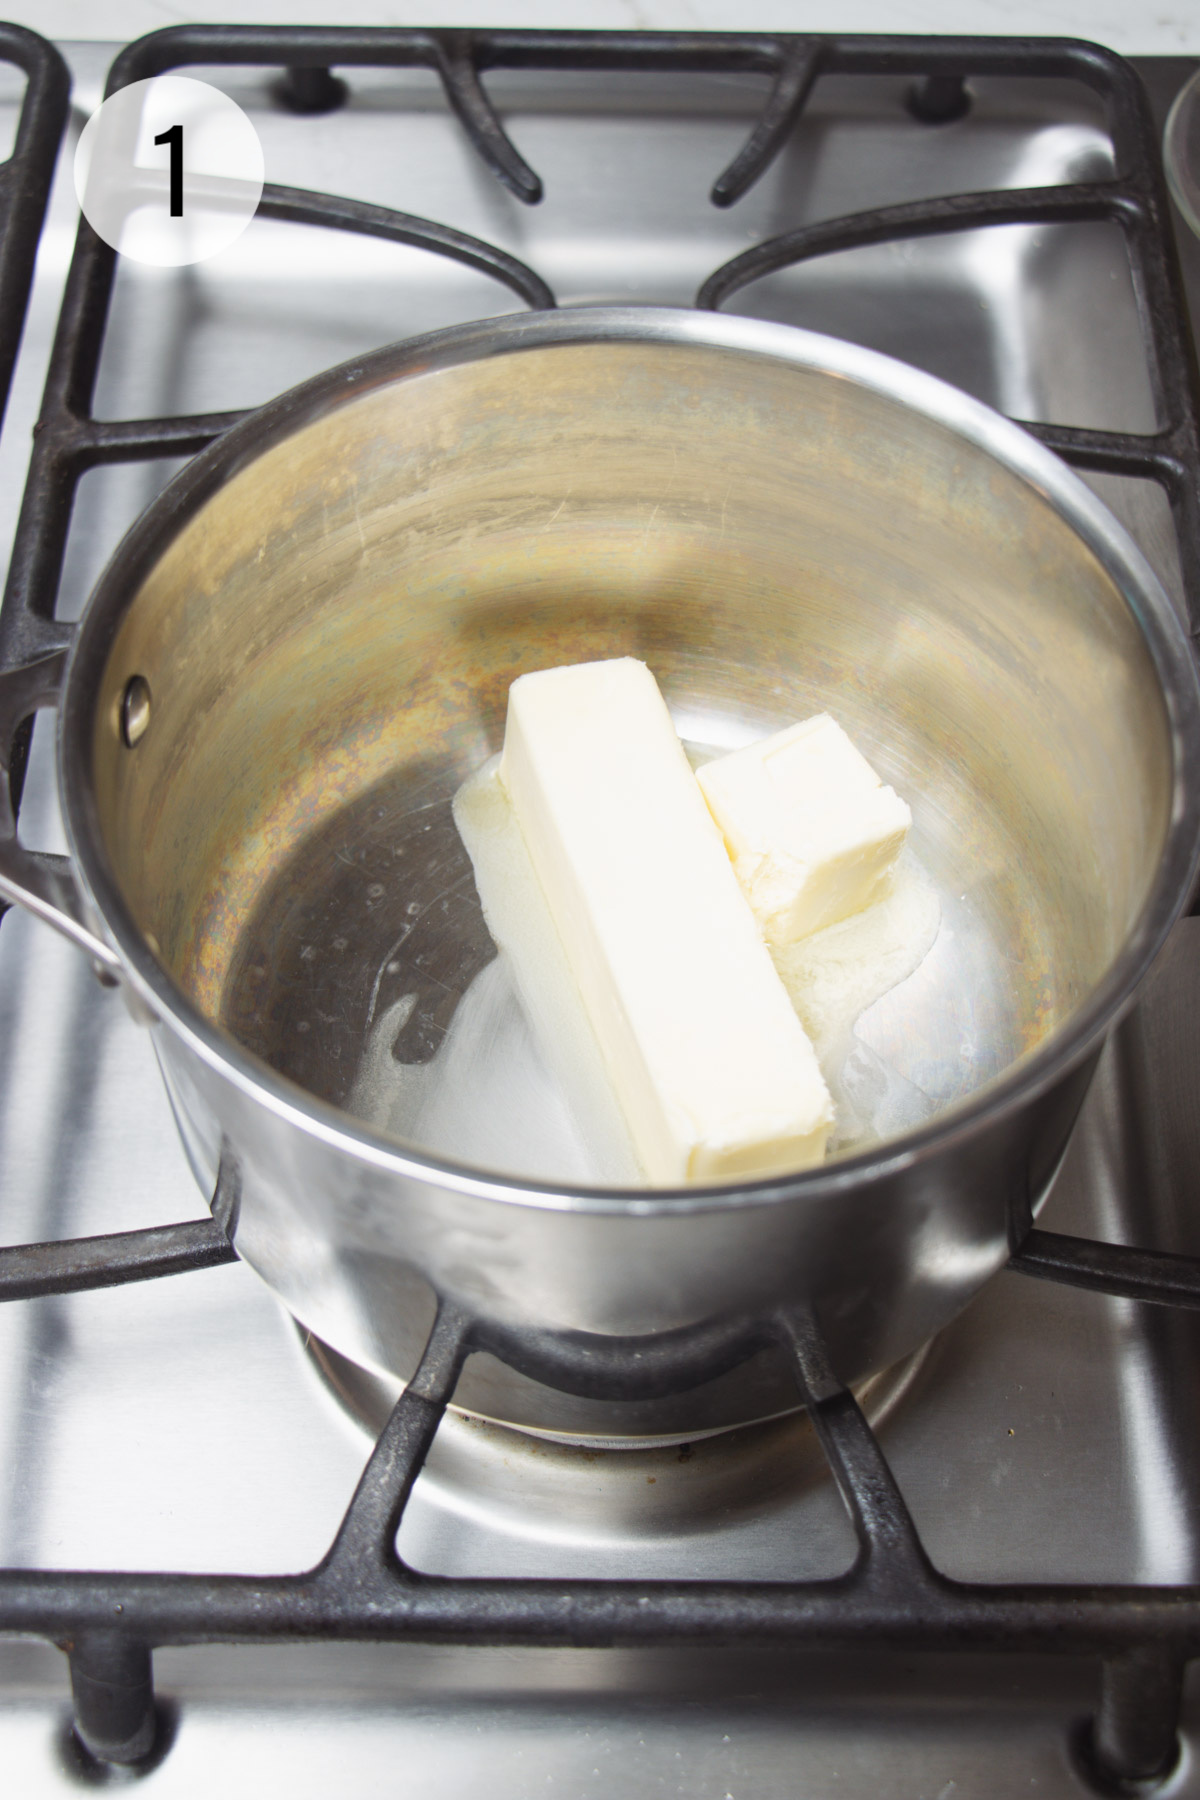 Silver saucepan with stick of butter melting on stove. 